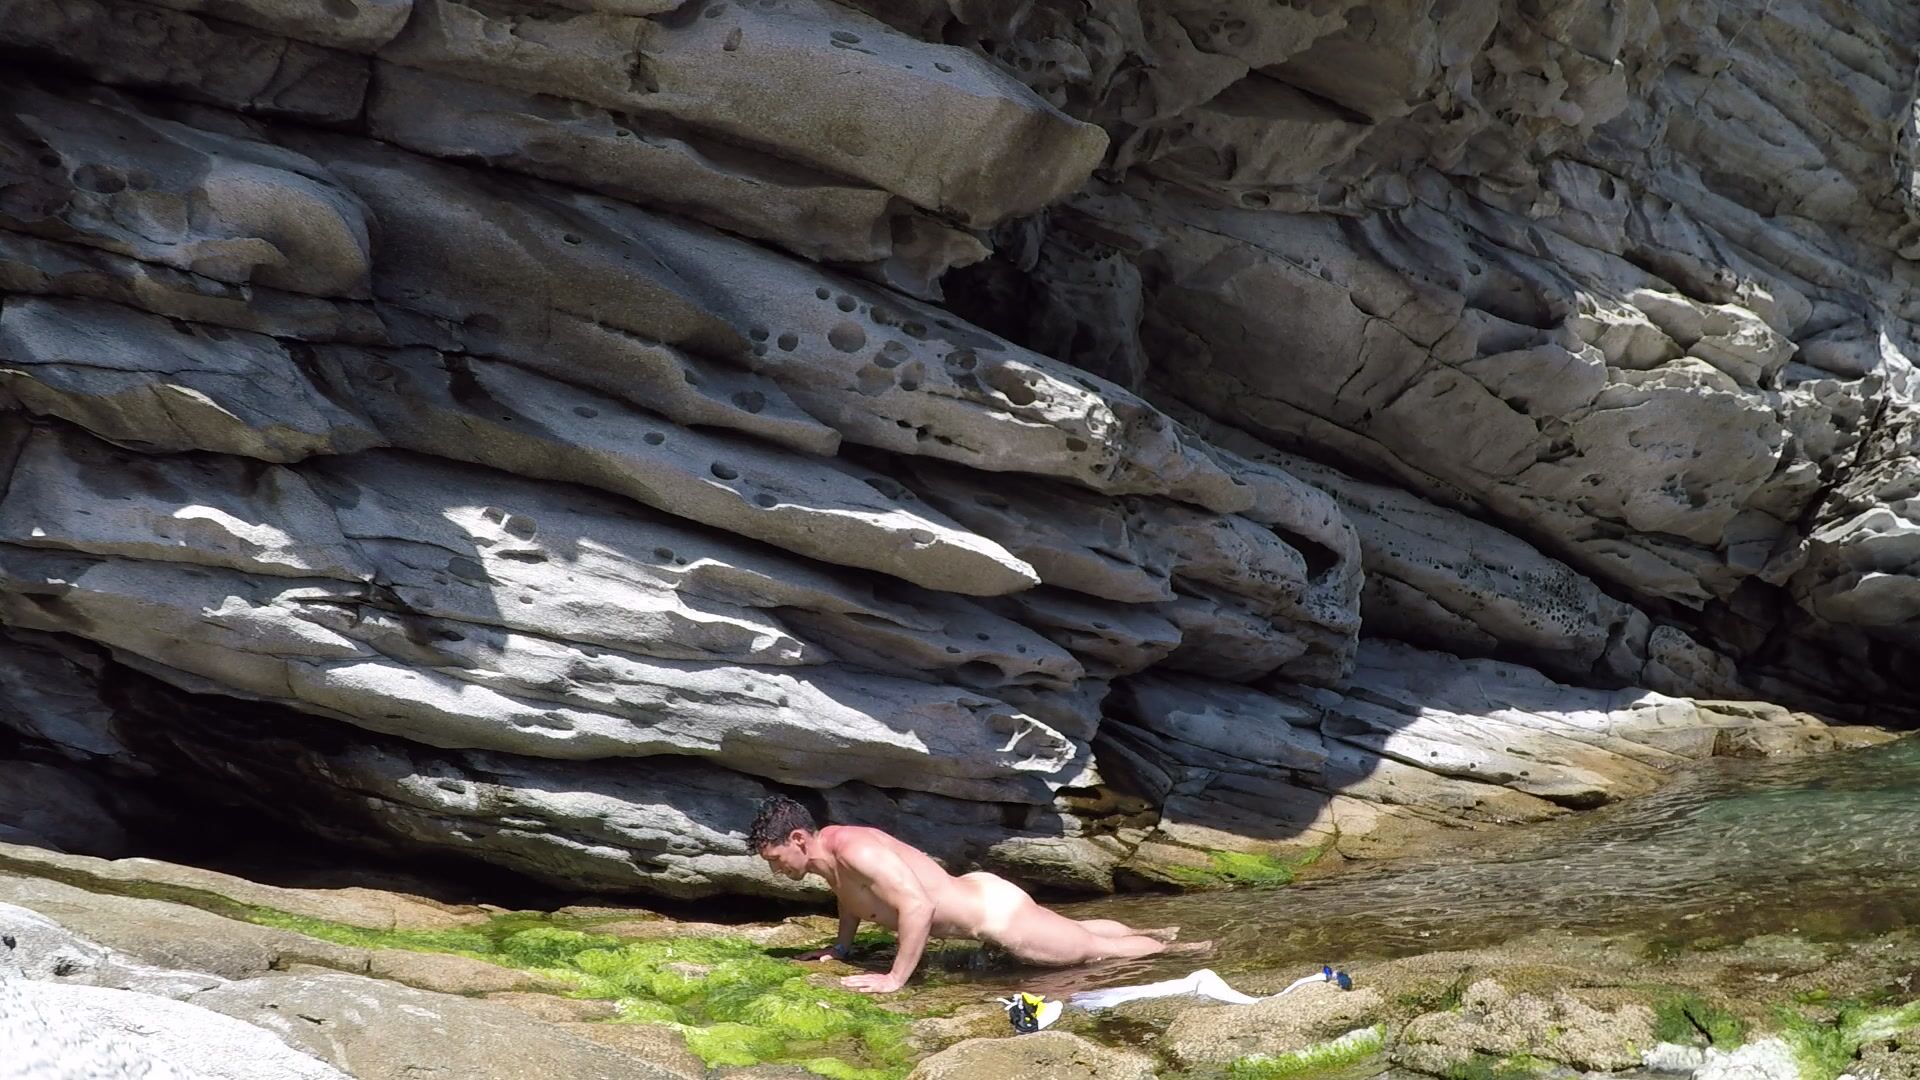 I love doing exercises at the beach. Check out my pullups on these rocks...naked, of course.